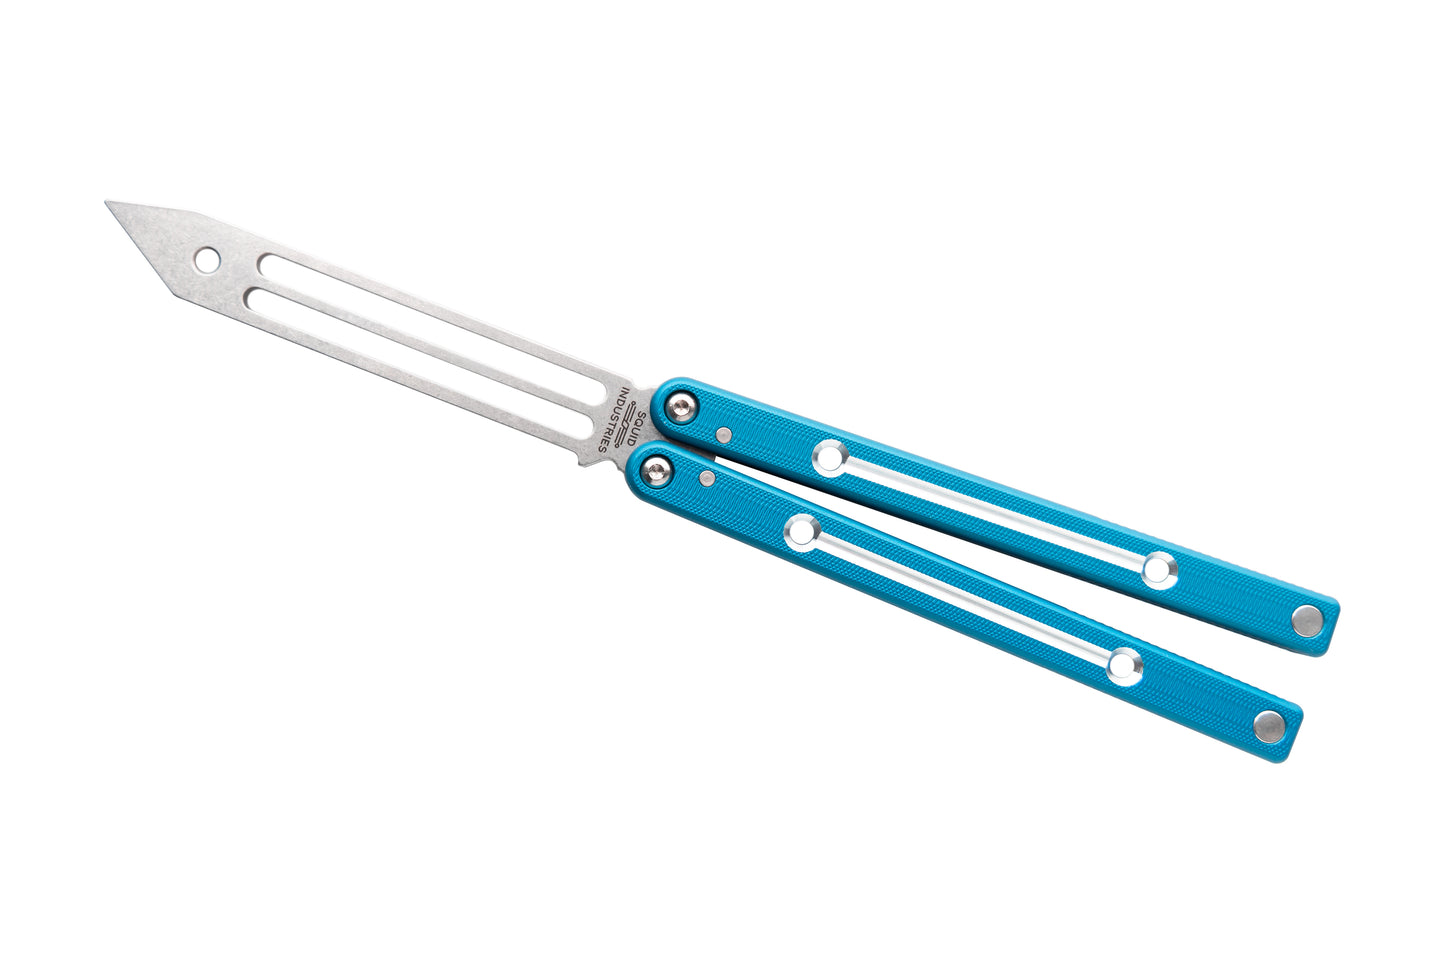 Dual-Tone Teal Clearance Blemished Squidtrainer V4 Balisong Butterfly Knife Trainer 